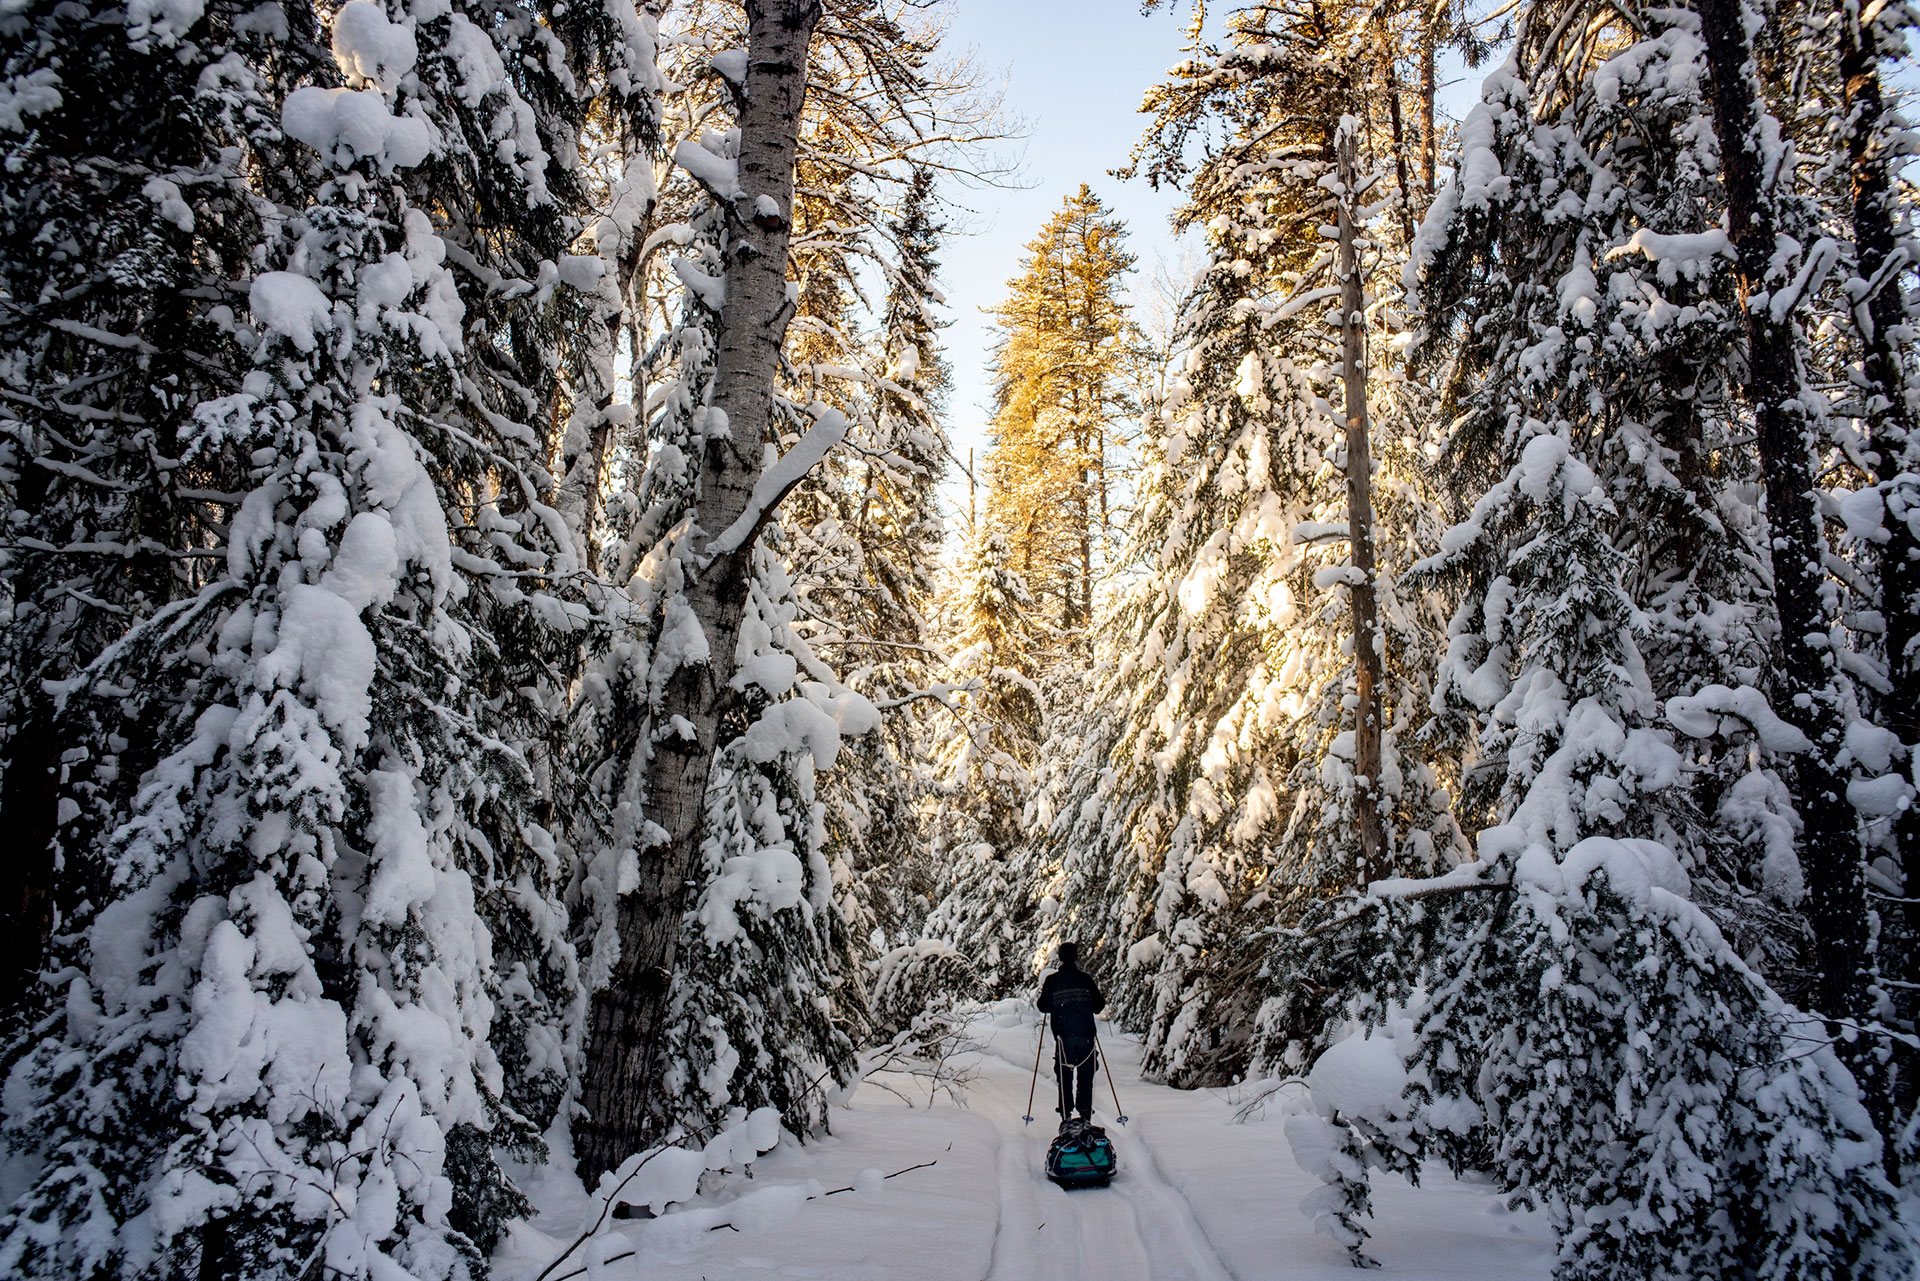 person backcountry skiing through a snowy winter forest